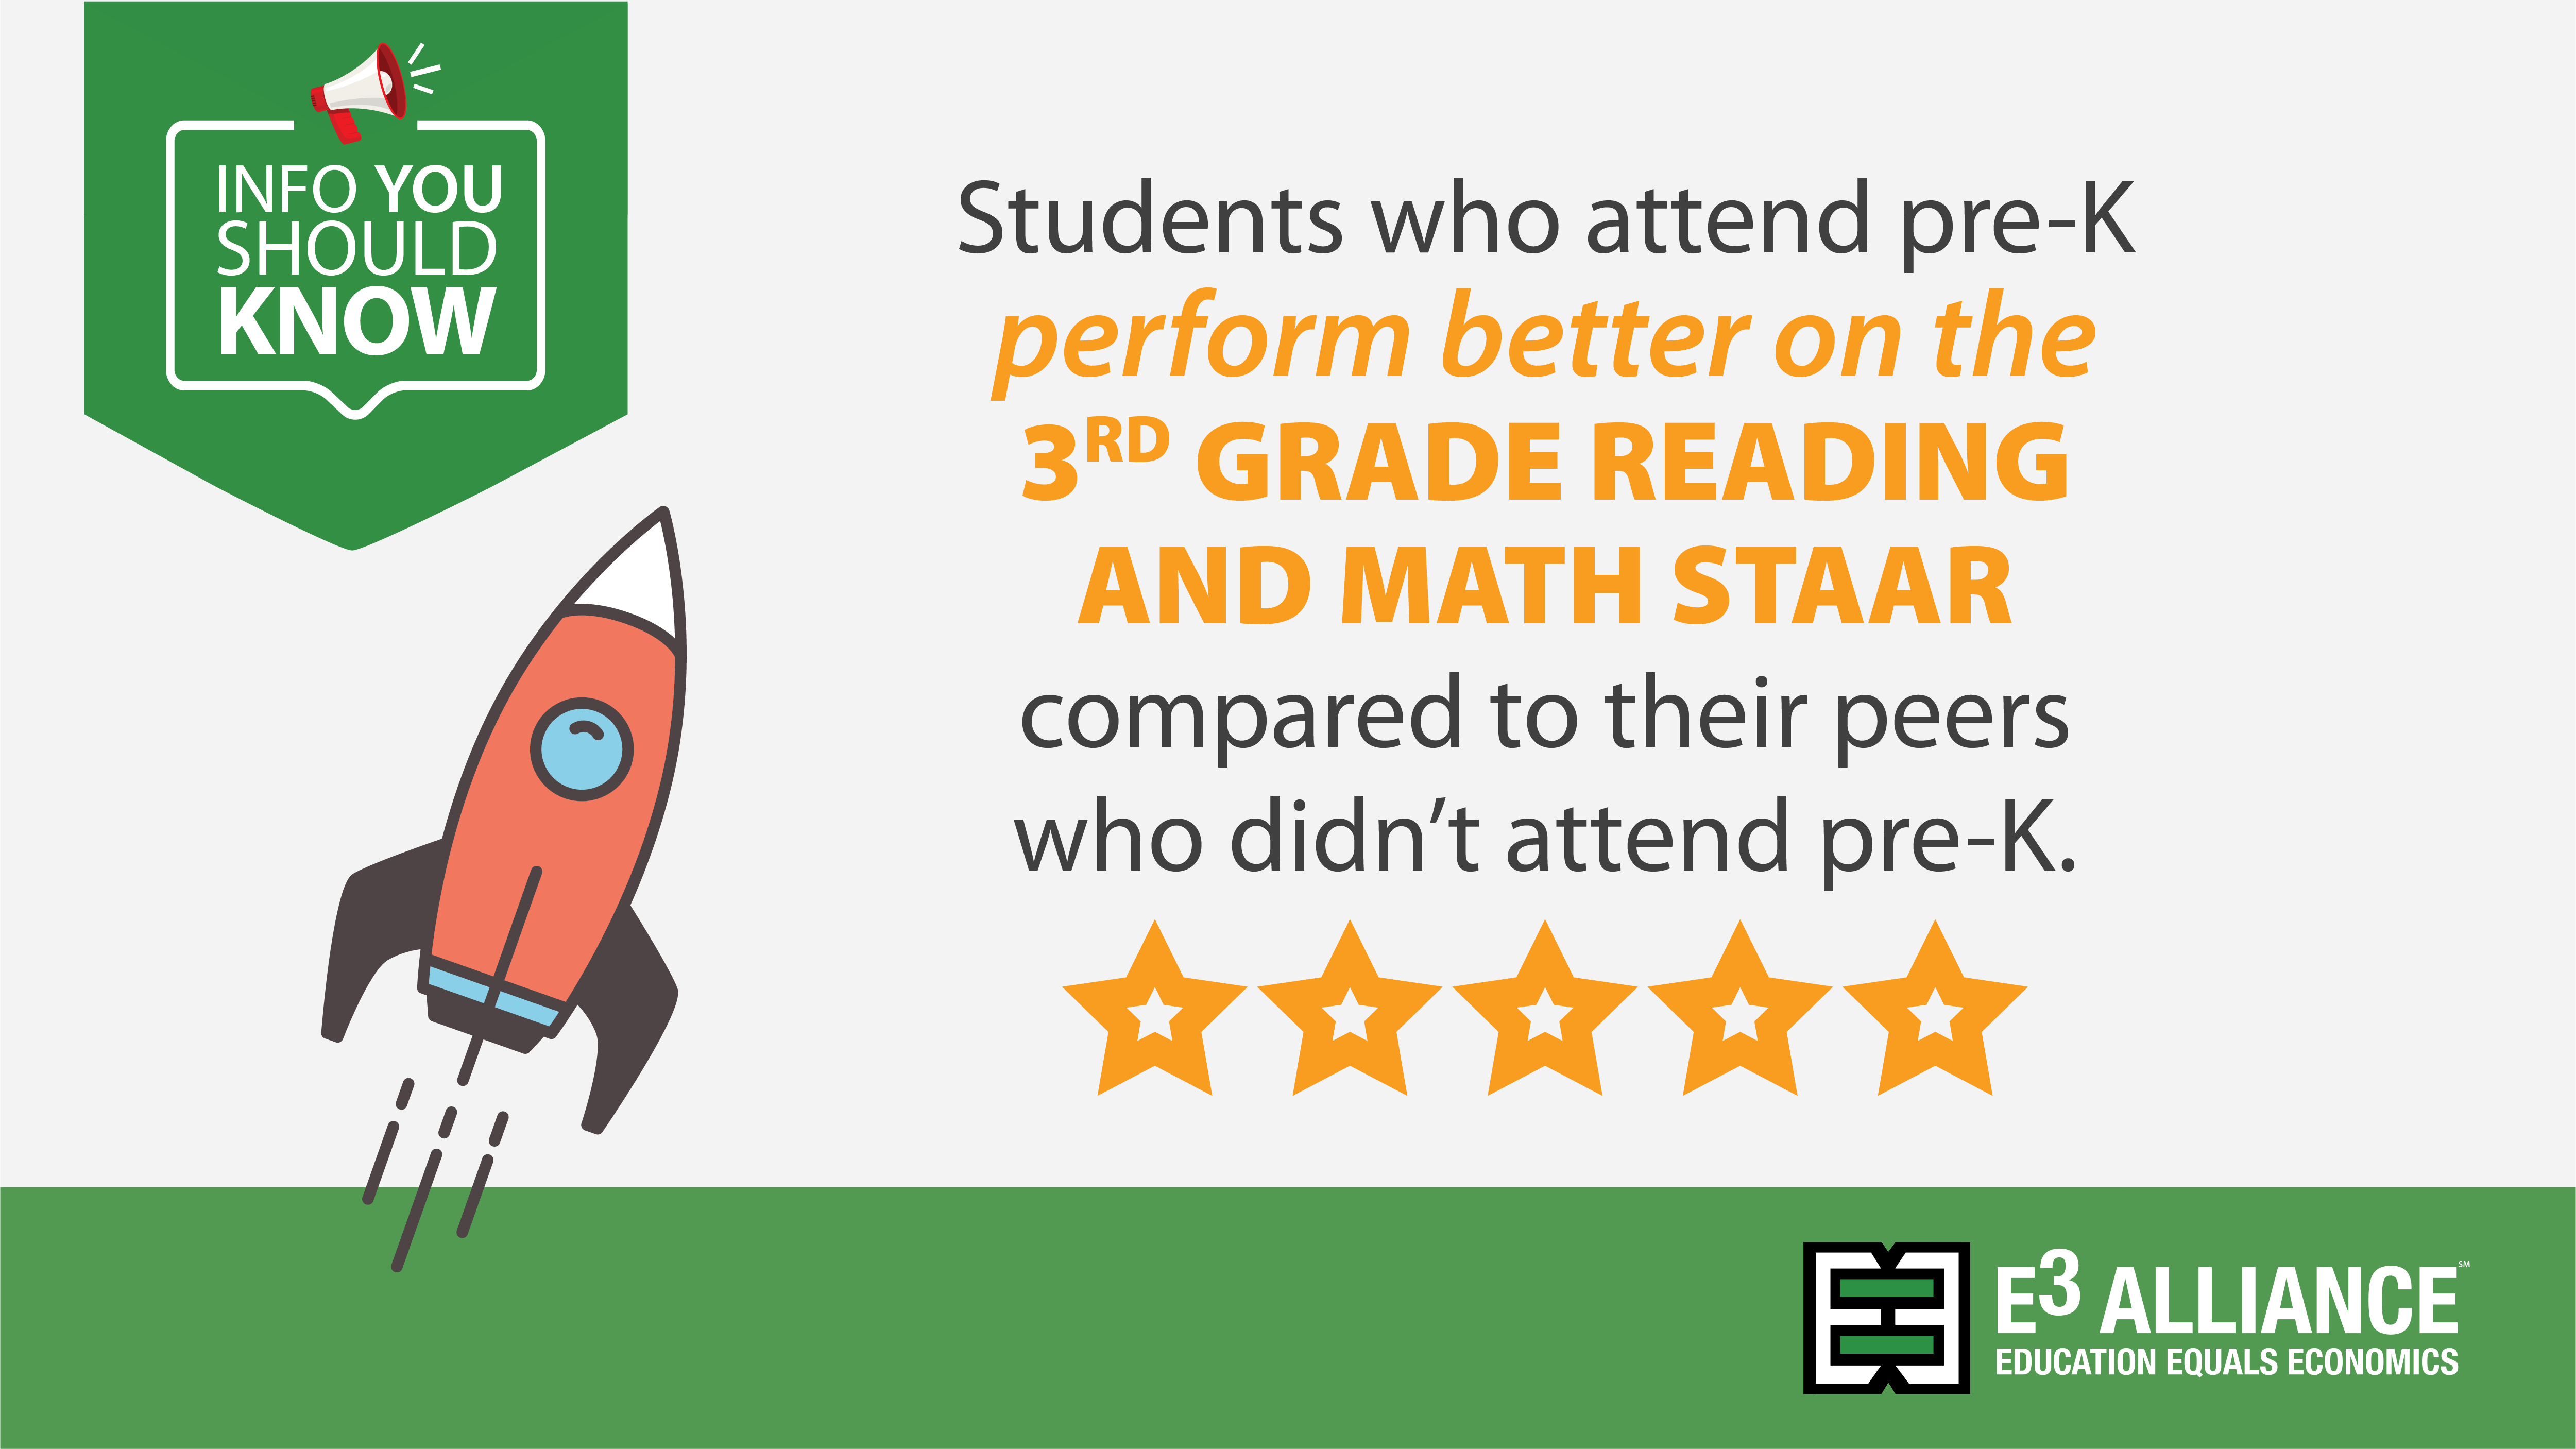 Students who attend pre-K perform better on the 3rd grade reading and math STAAR compared to their peers who didn’t attend pre-K.